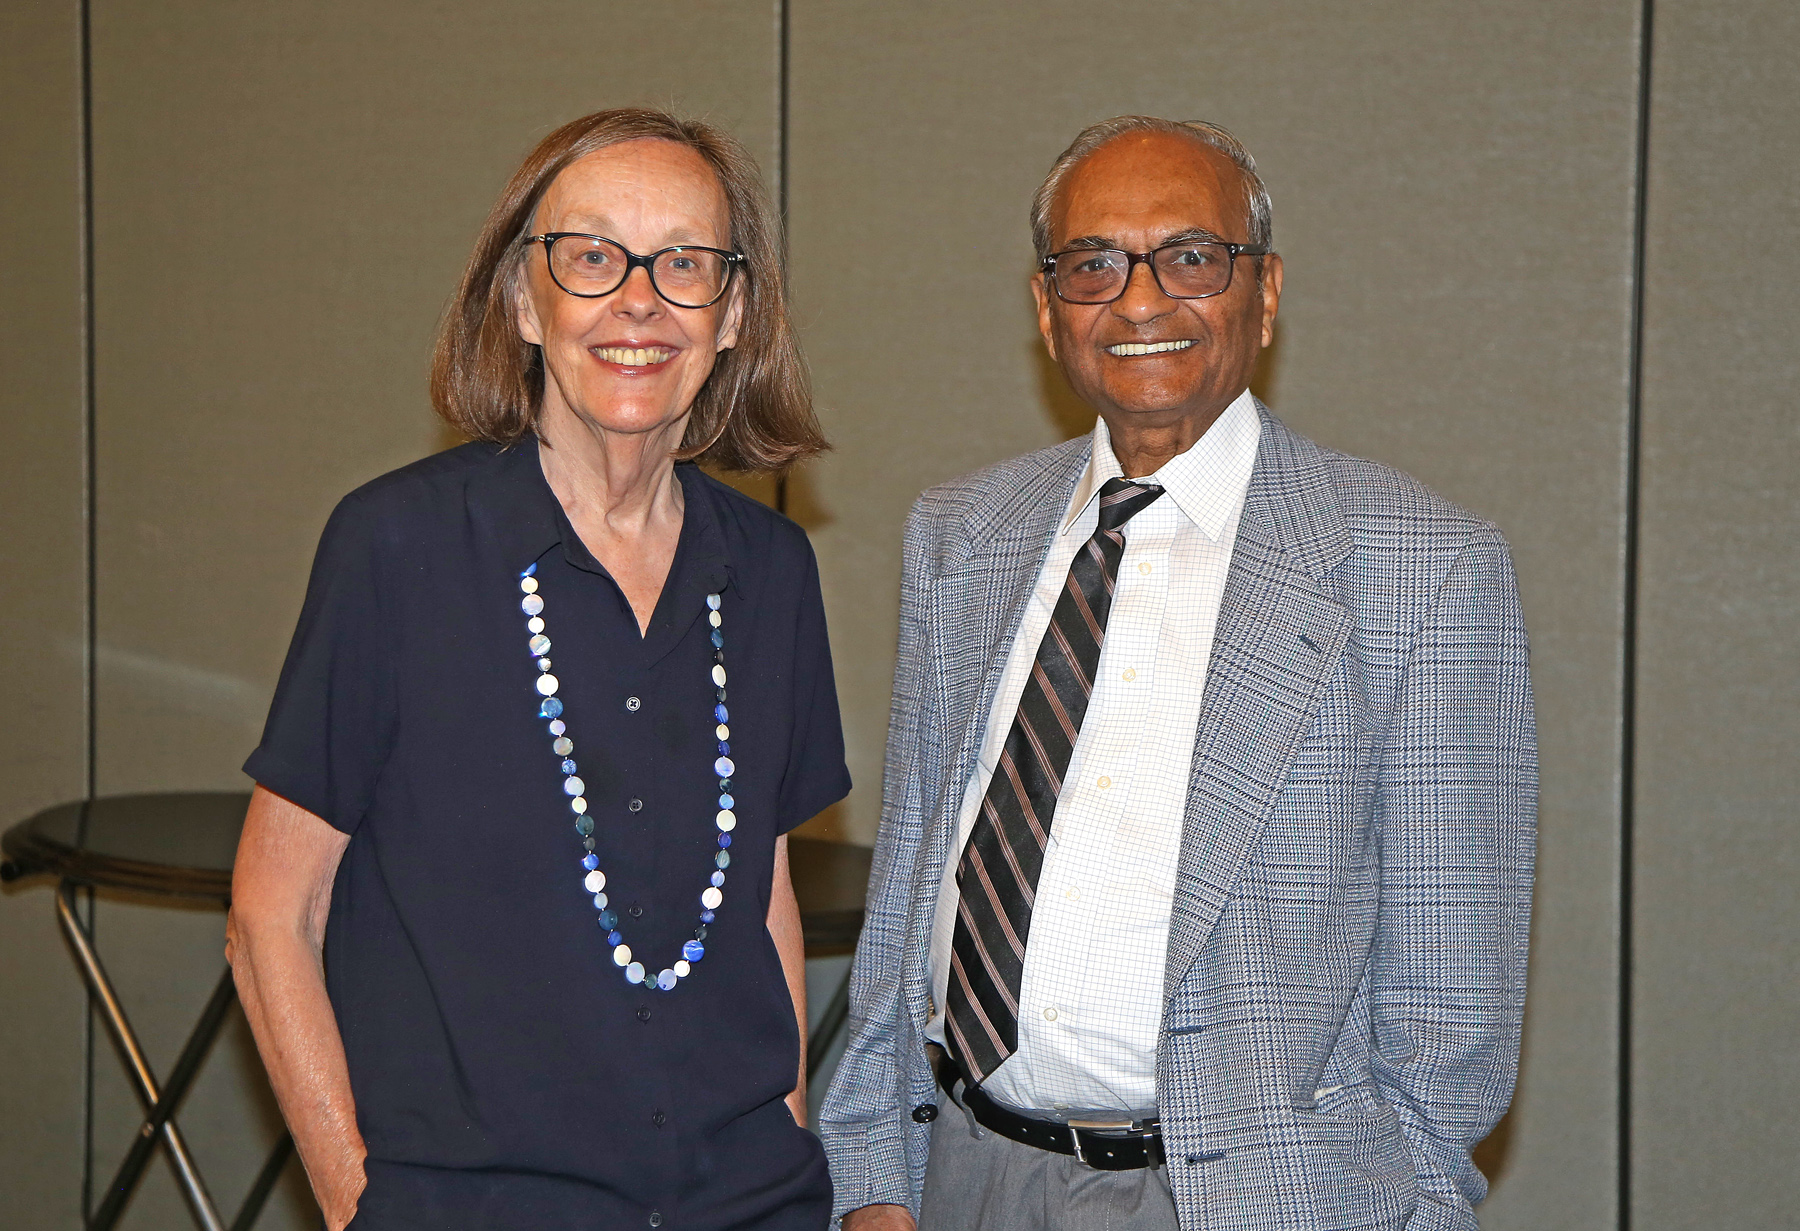 Guests at Spring 2019 Luncheon and Annual Meeting - Emeriti Assoc.